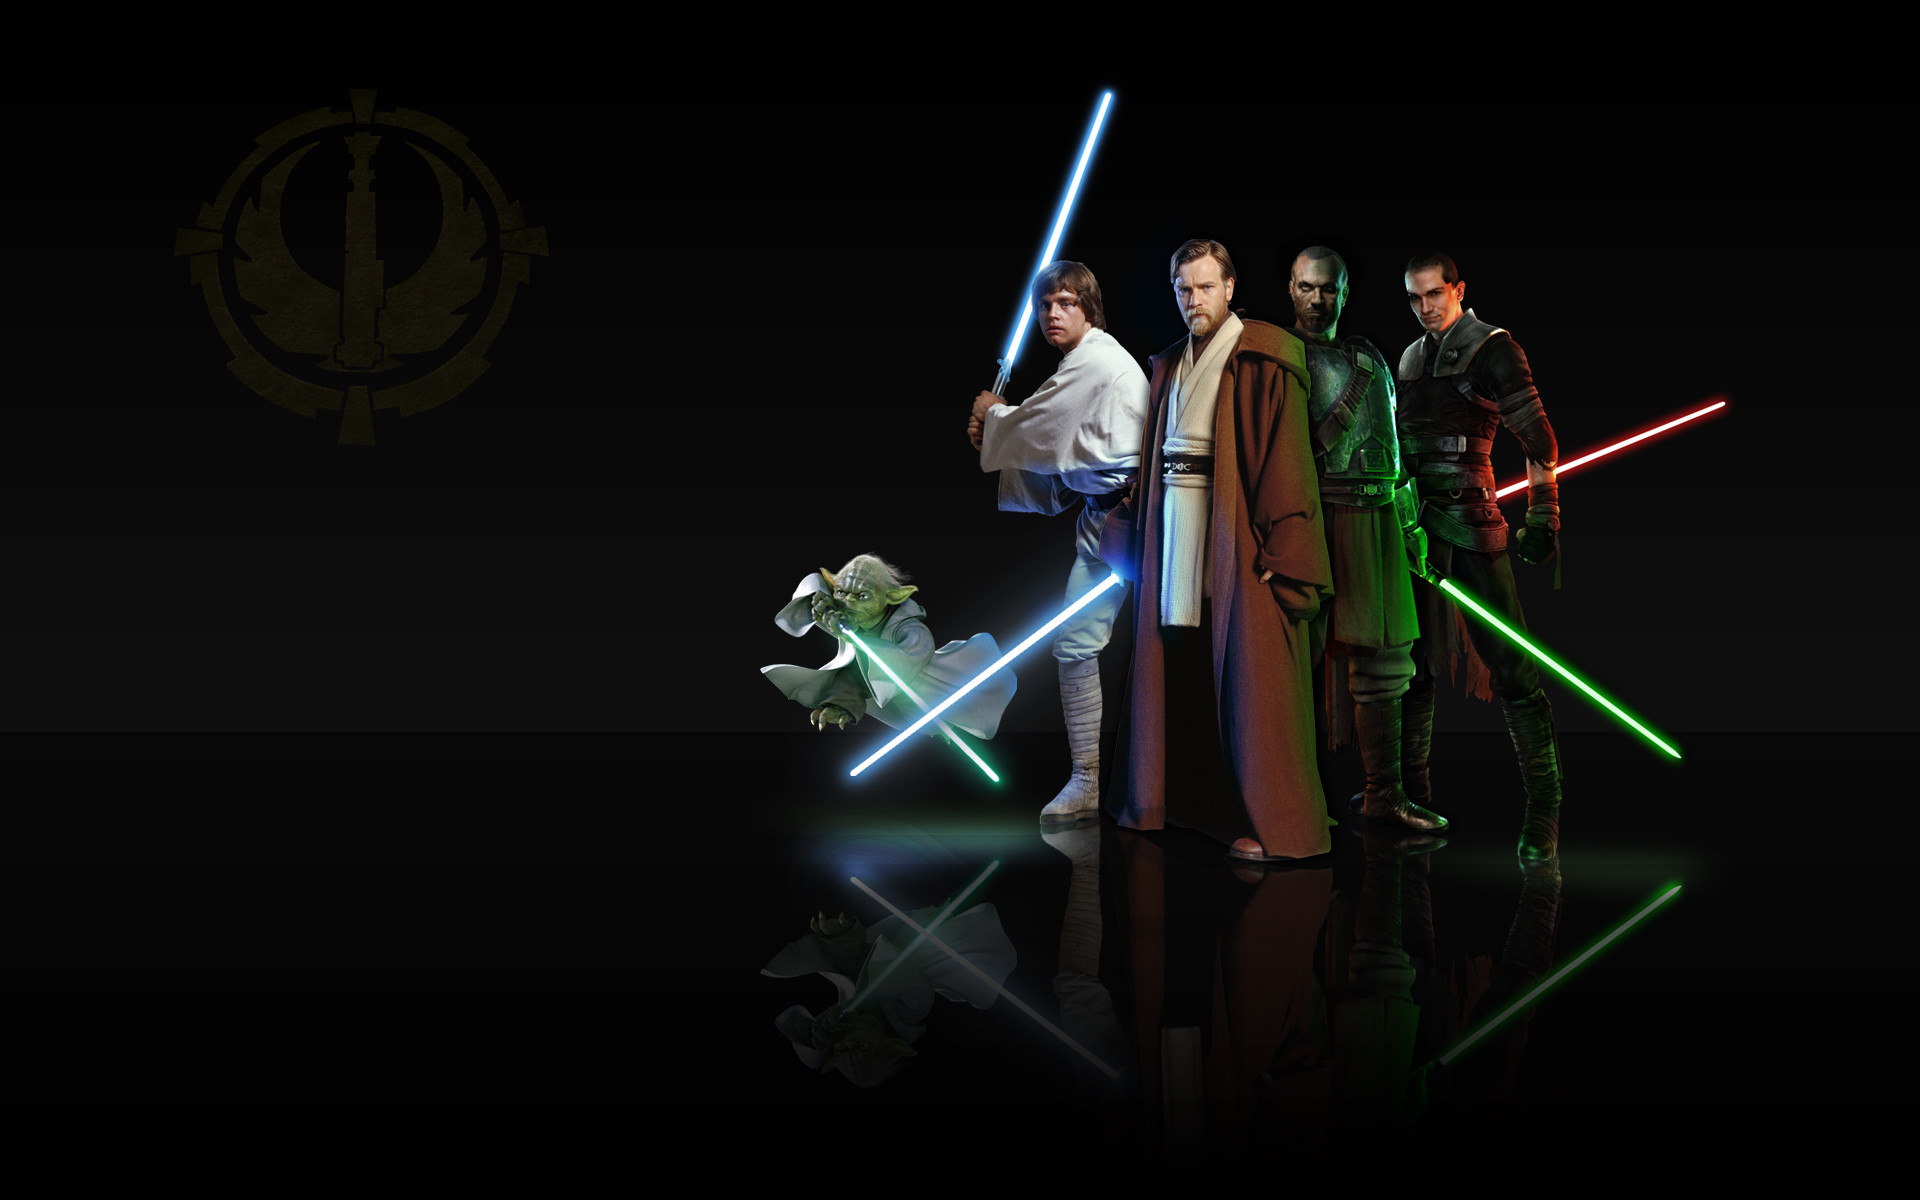 Quick Wallpaper during my break, of my favorite Jedi's. Can't really find  any cool wallpaper of Star Wars, so if you have a large sc.